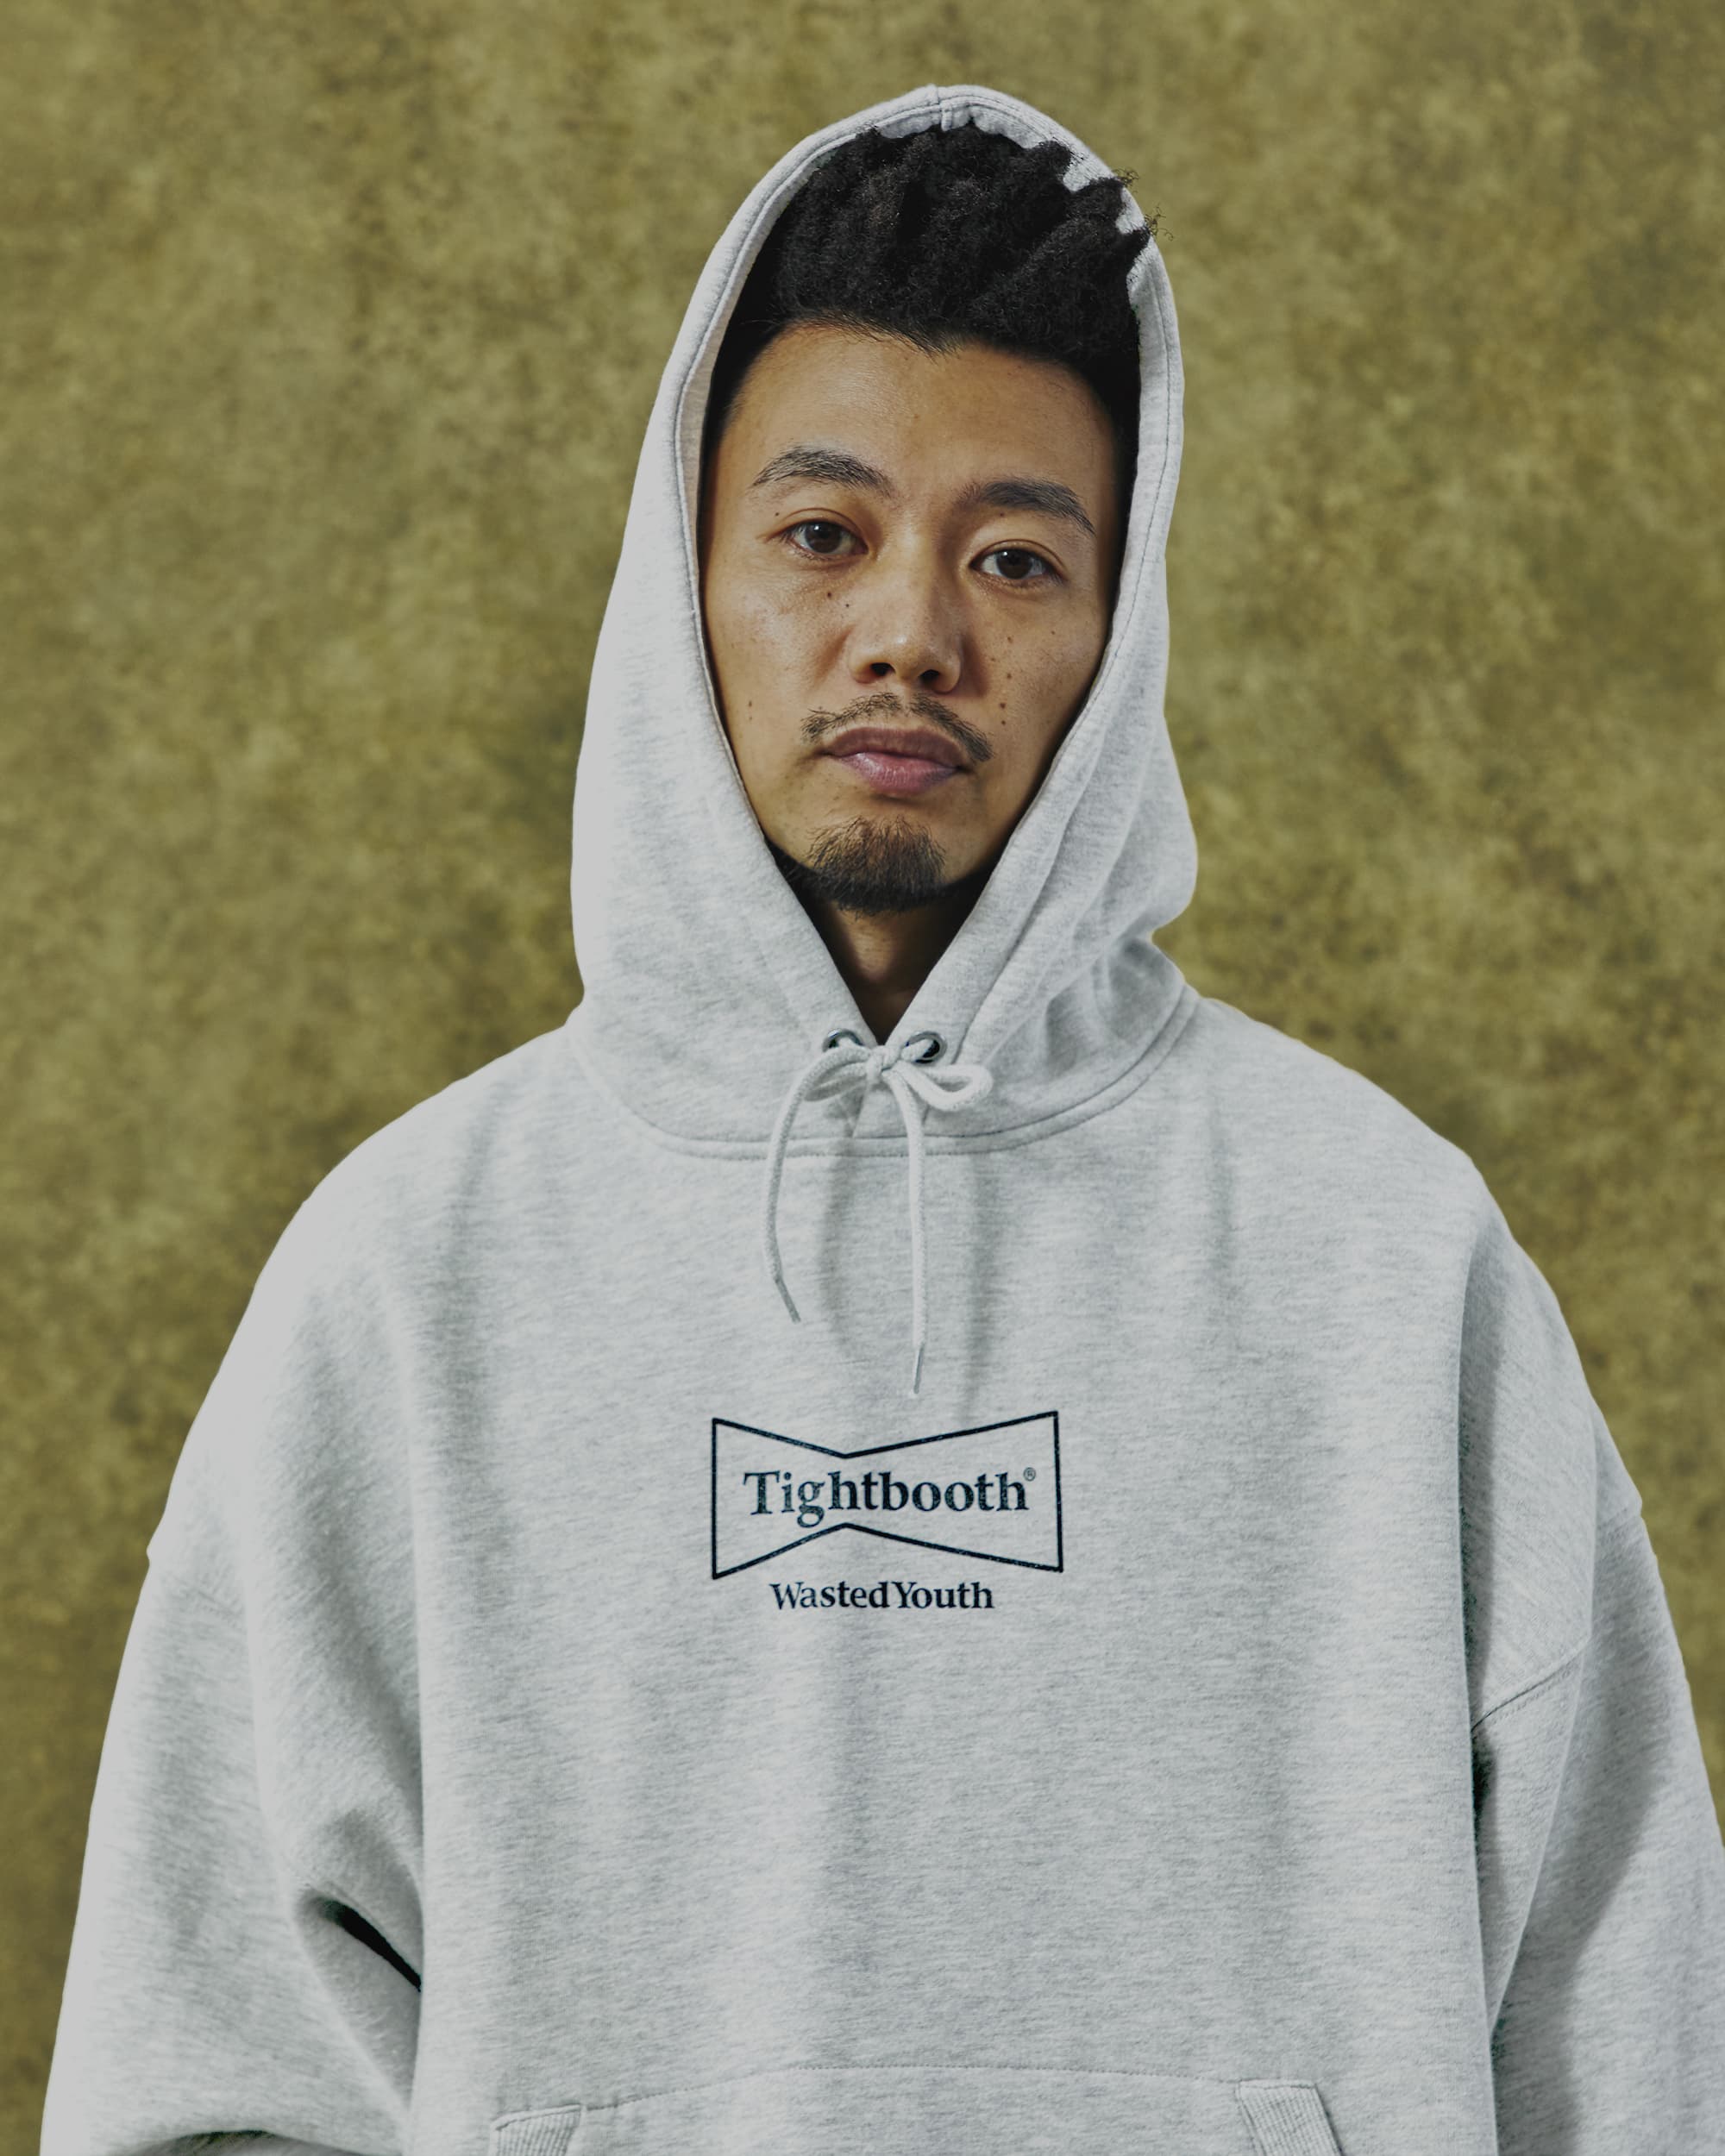 TIGHTBOOTH 15th Anniversary Collaboration
